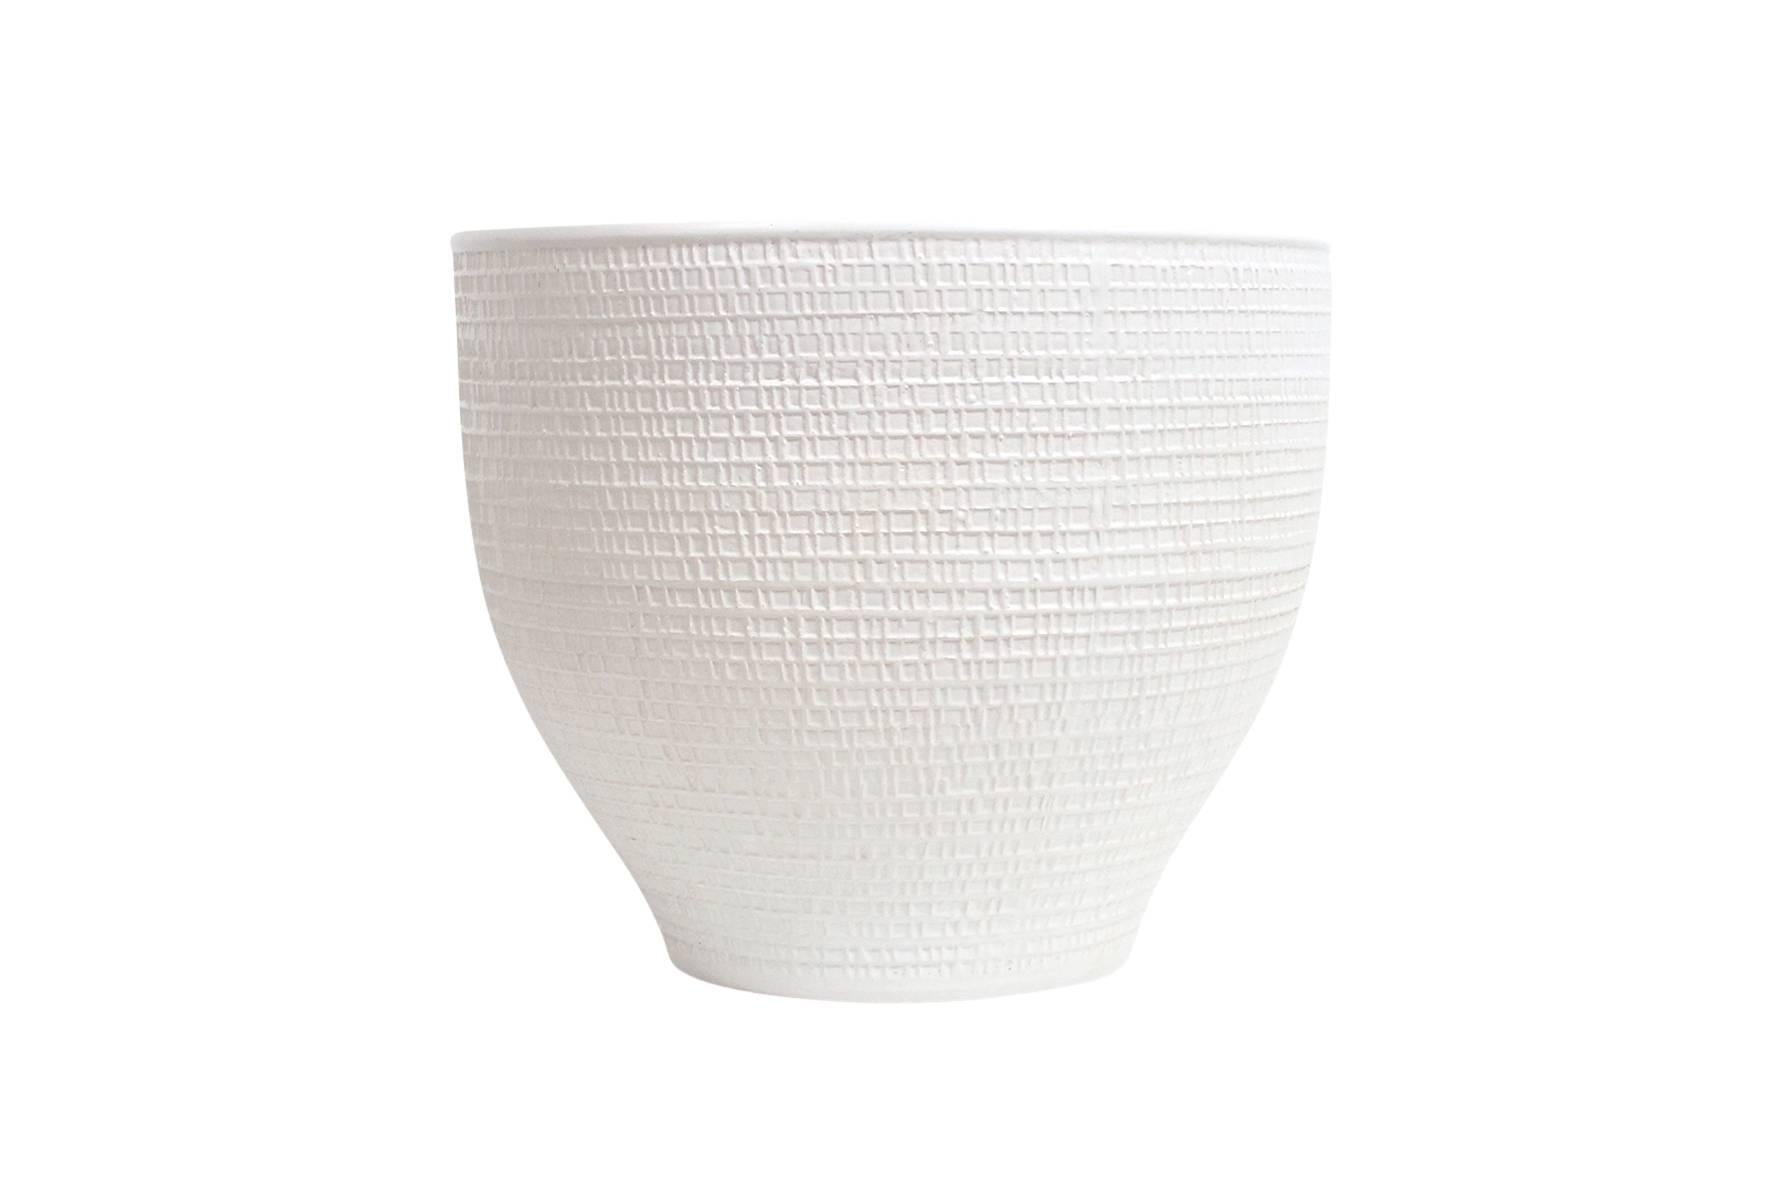 Monumental ceramic vessel / planter by David Cressey for Architectural Pottery. Subtle textured exterior surface with bone white glaze.